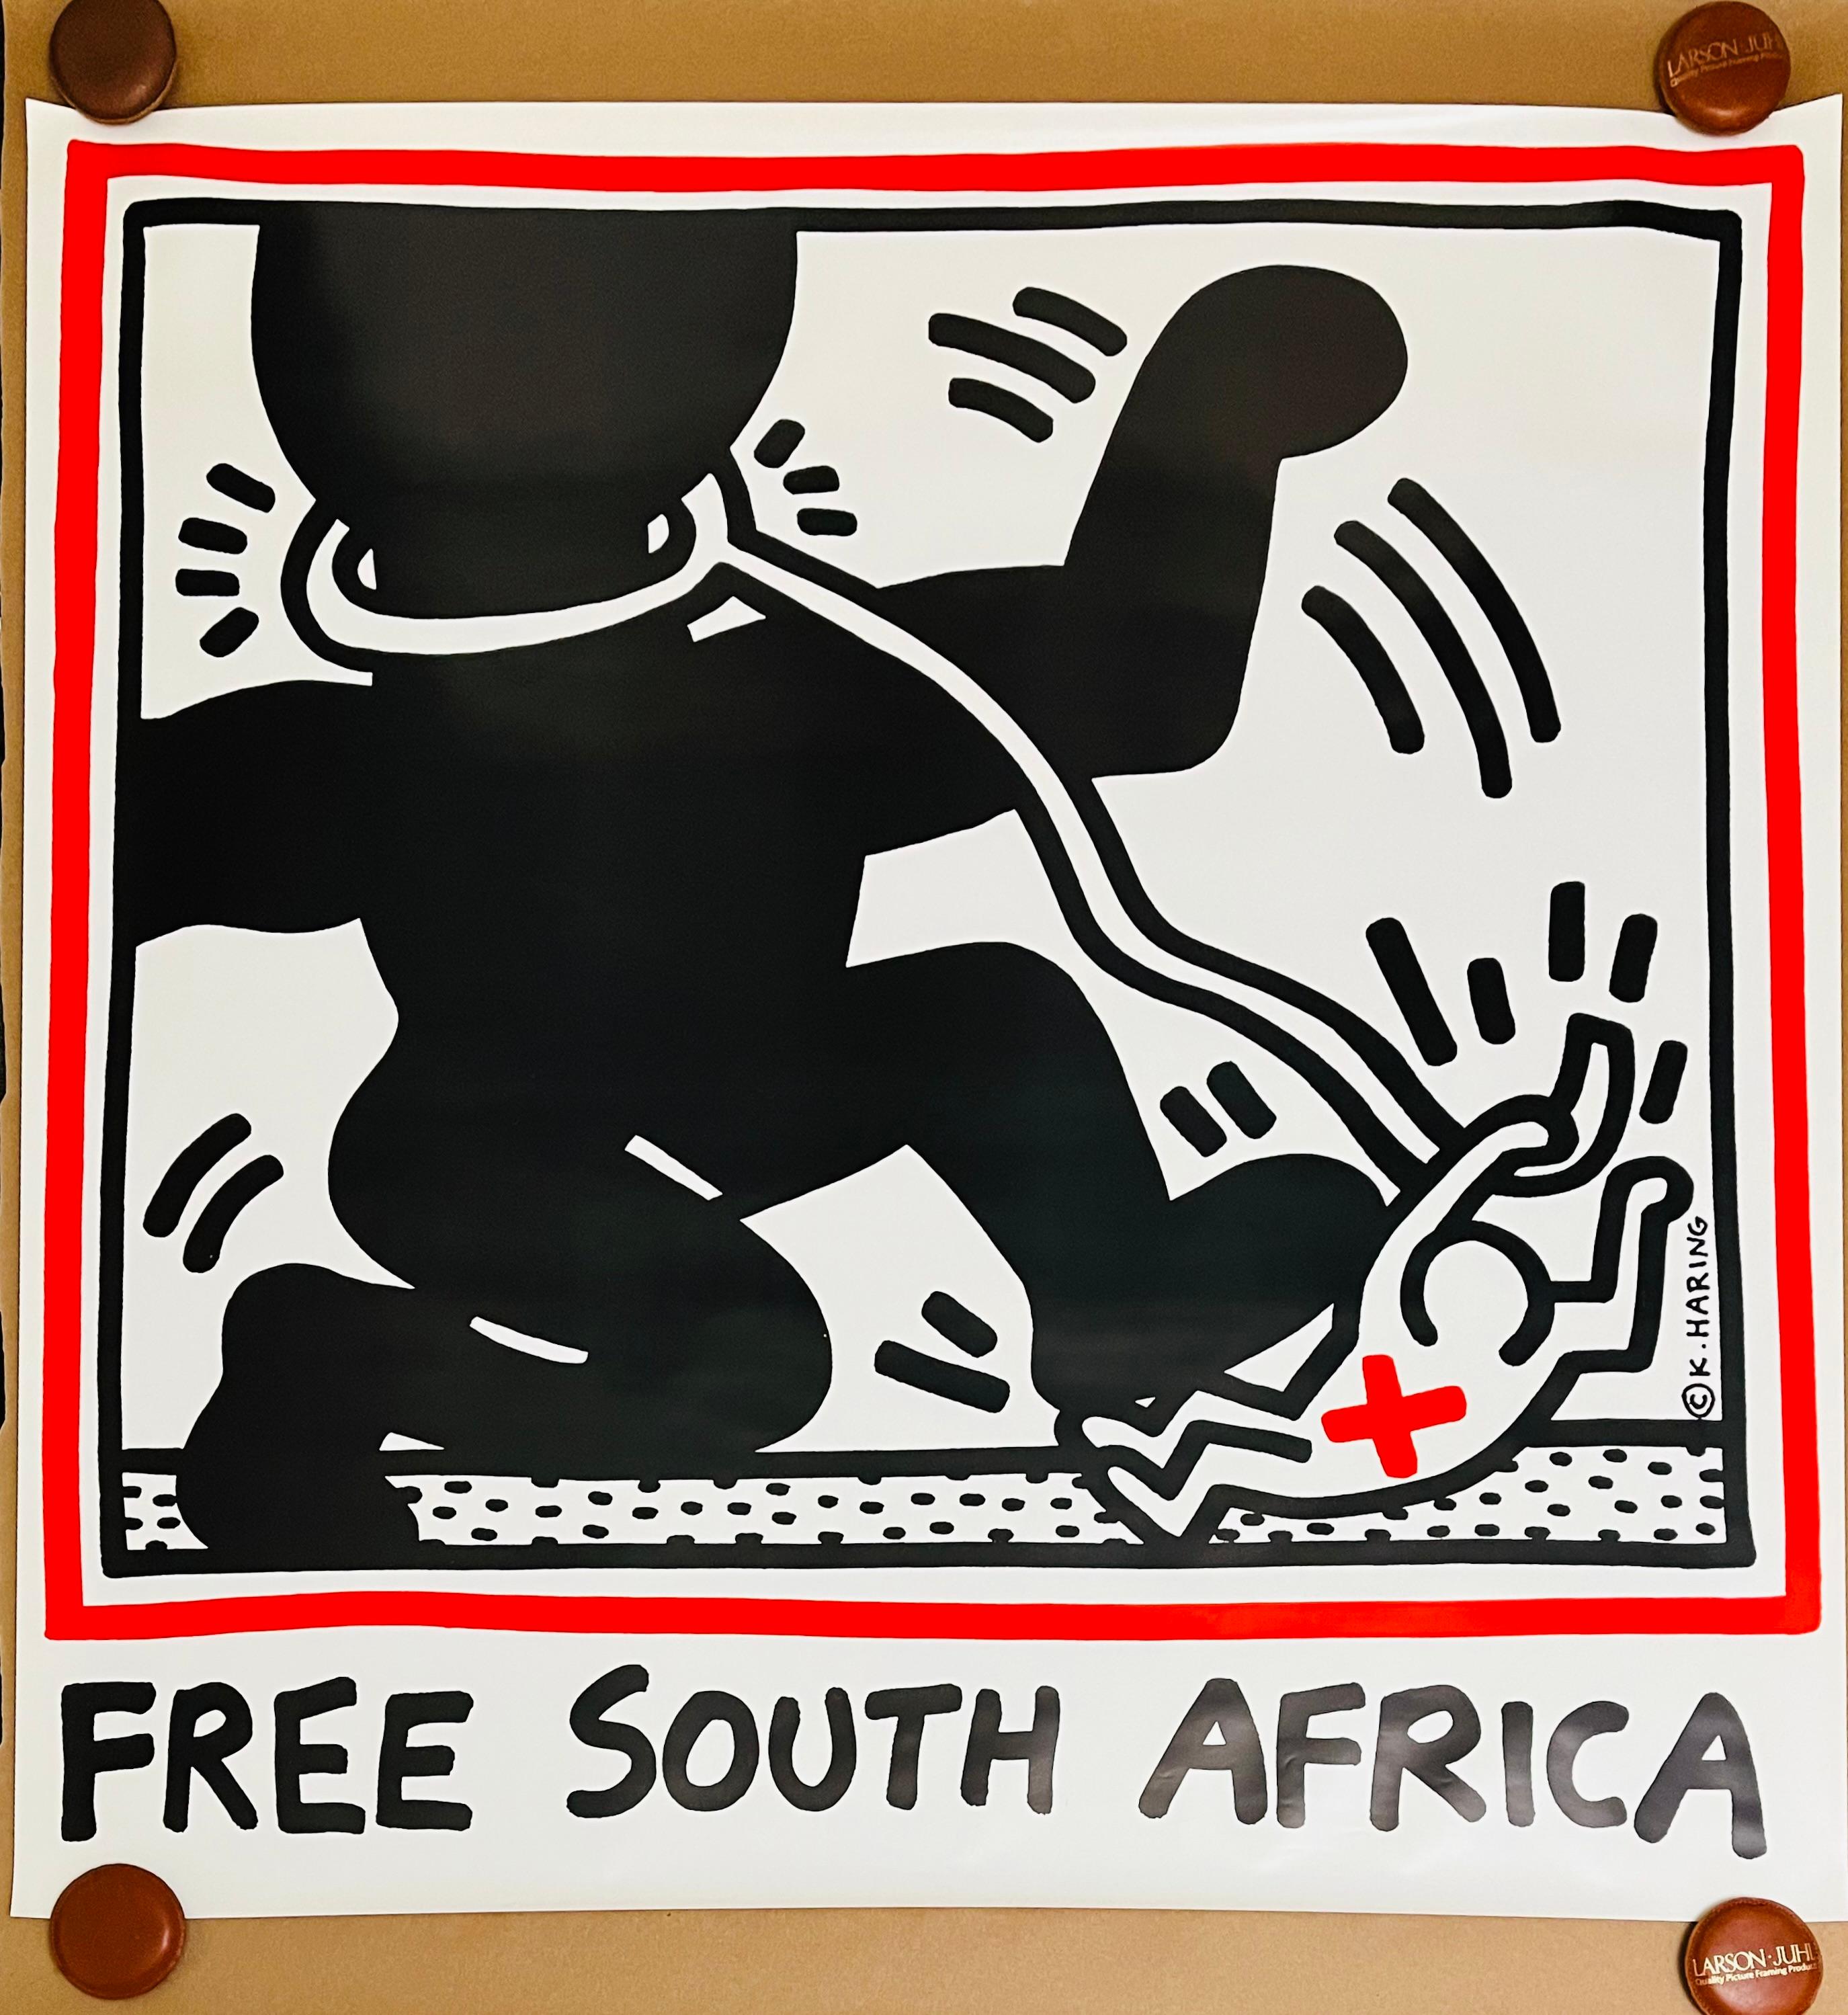 Keith Haring Free South Africa 1985:
Original 1985 Keith Haring Free South Africa poster- a key historical Keith Haring activist poster designed & created by the artist. This work is featured in the Catalog Raisonne of Haring posters by Jürgen and